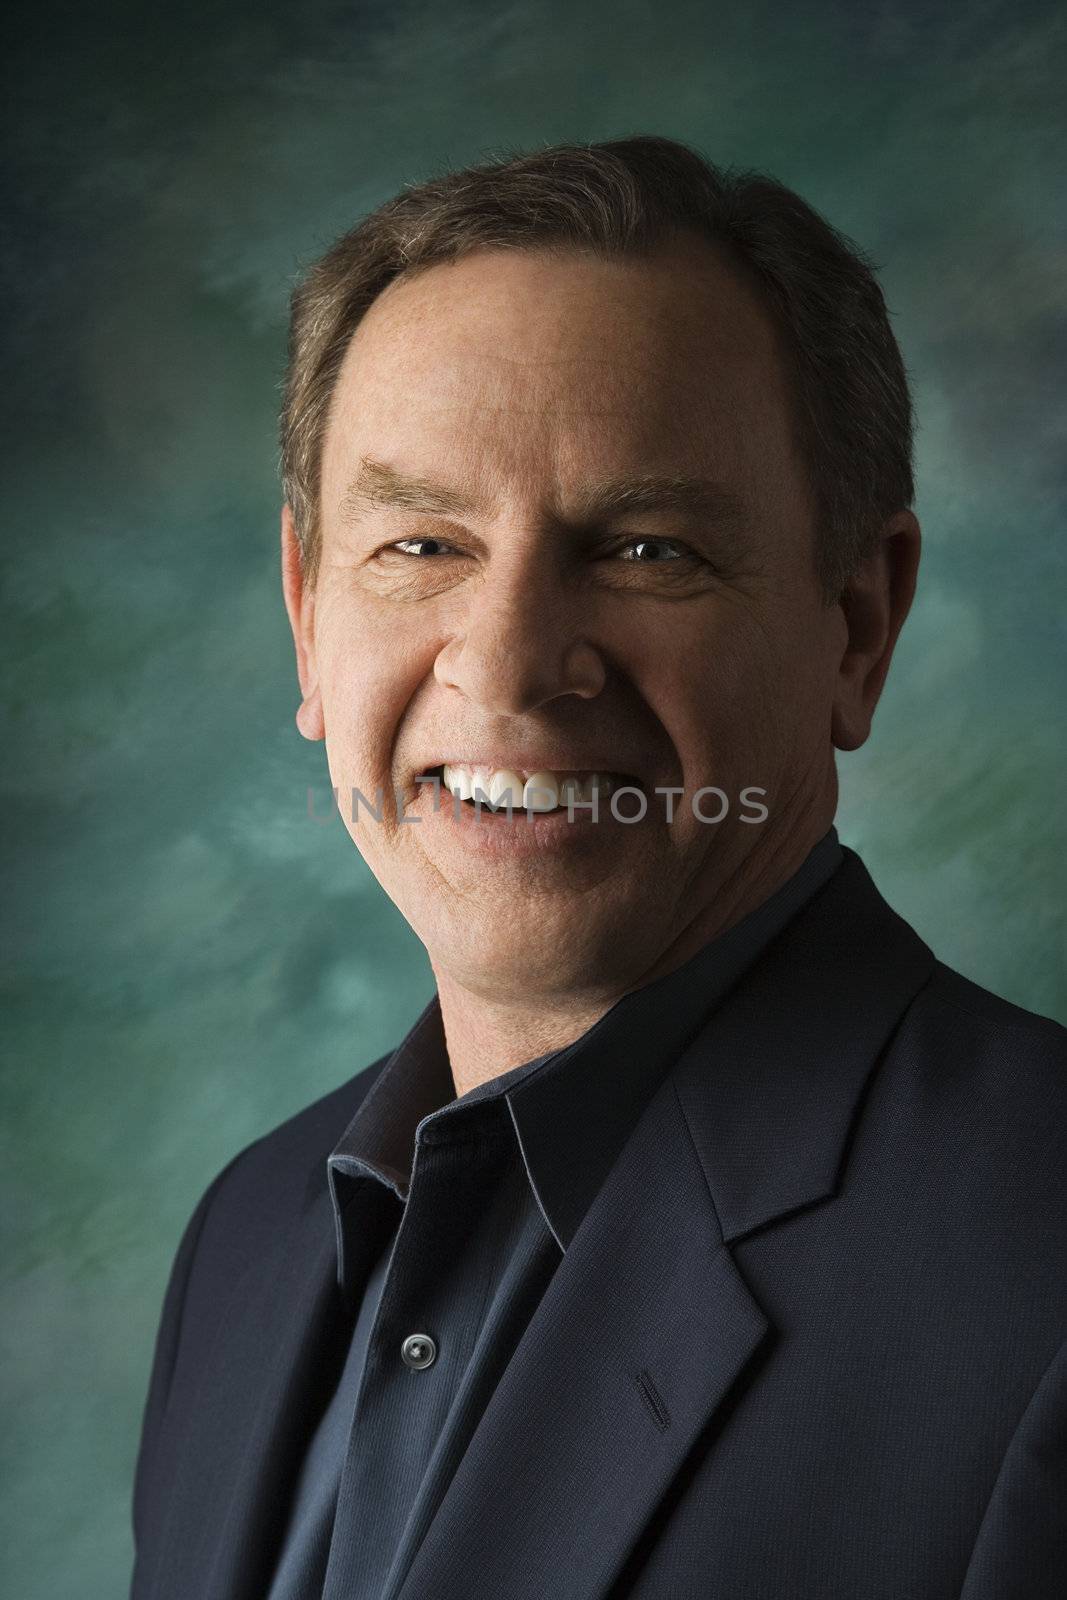 Middle-aged Caucasian man on studio background.